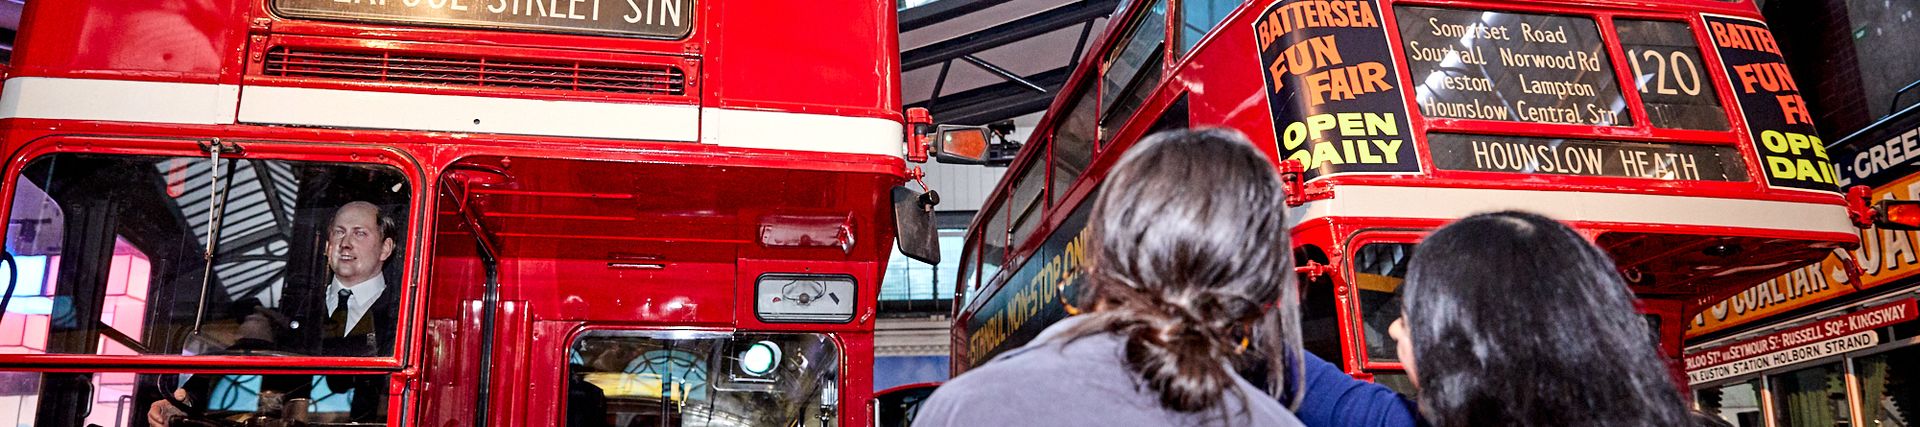 Two young women looking at two routemaster buses on display at the museum